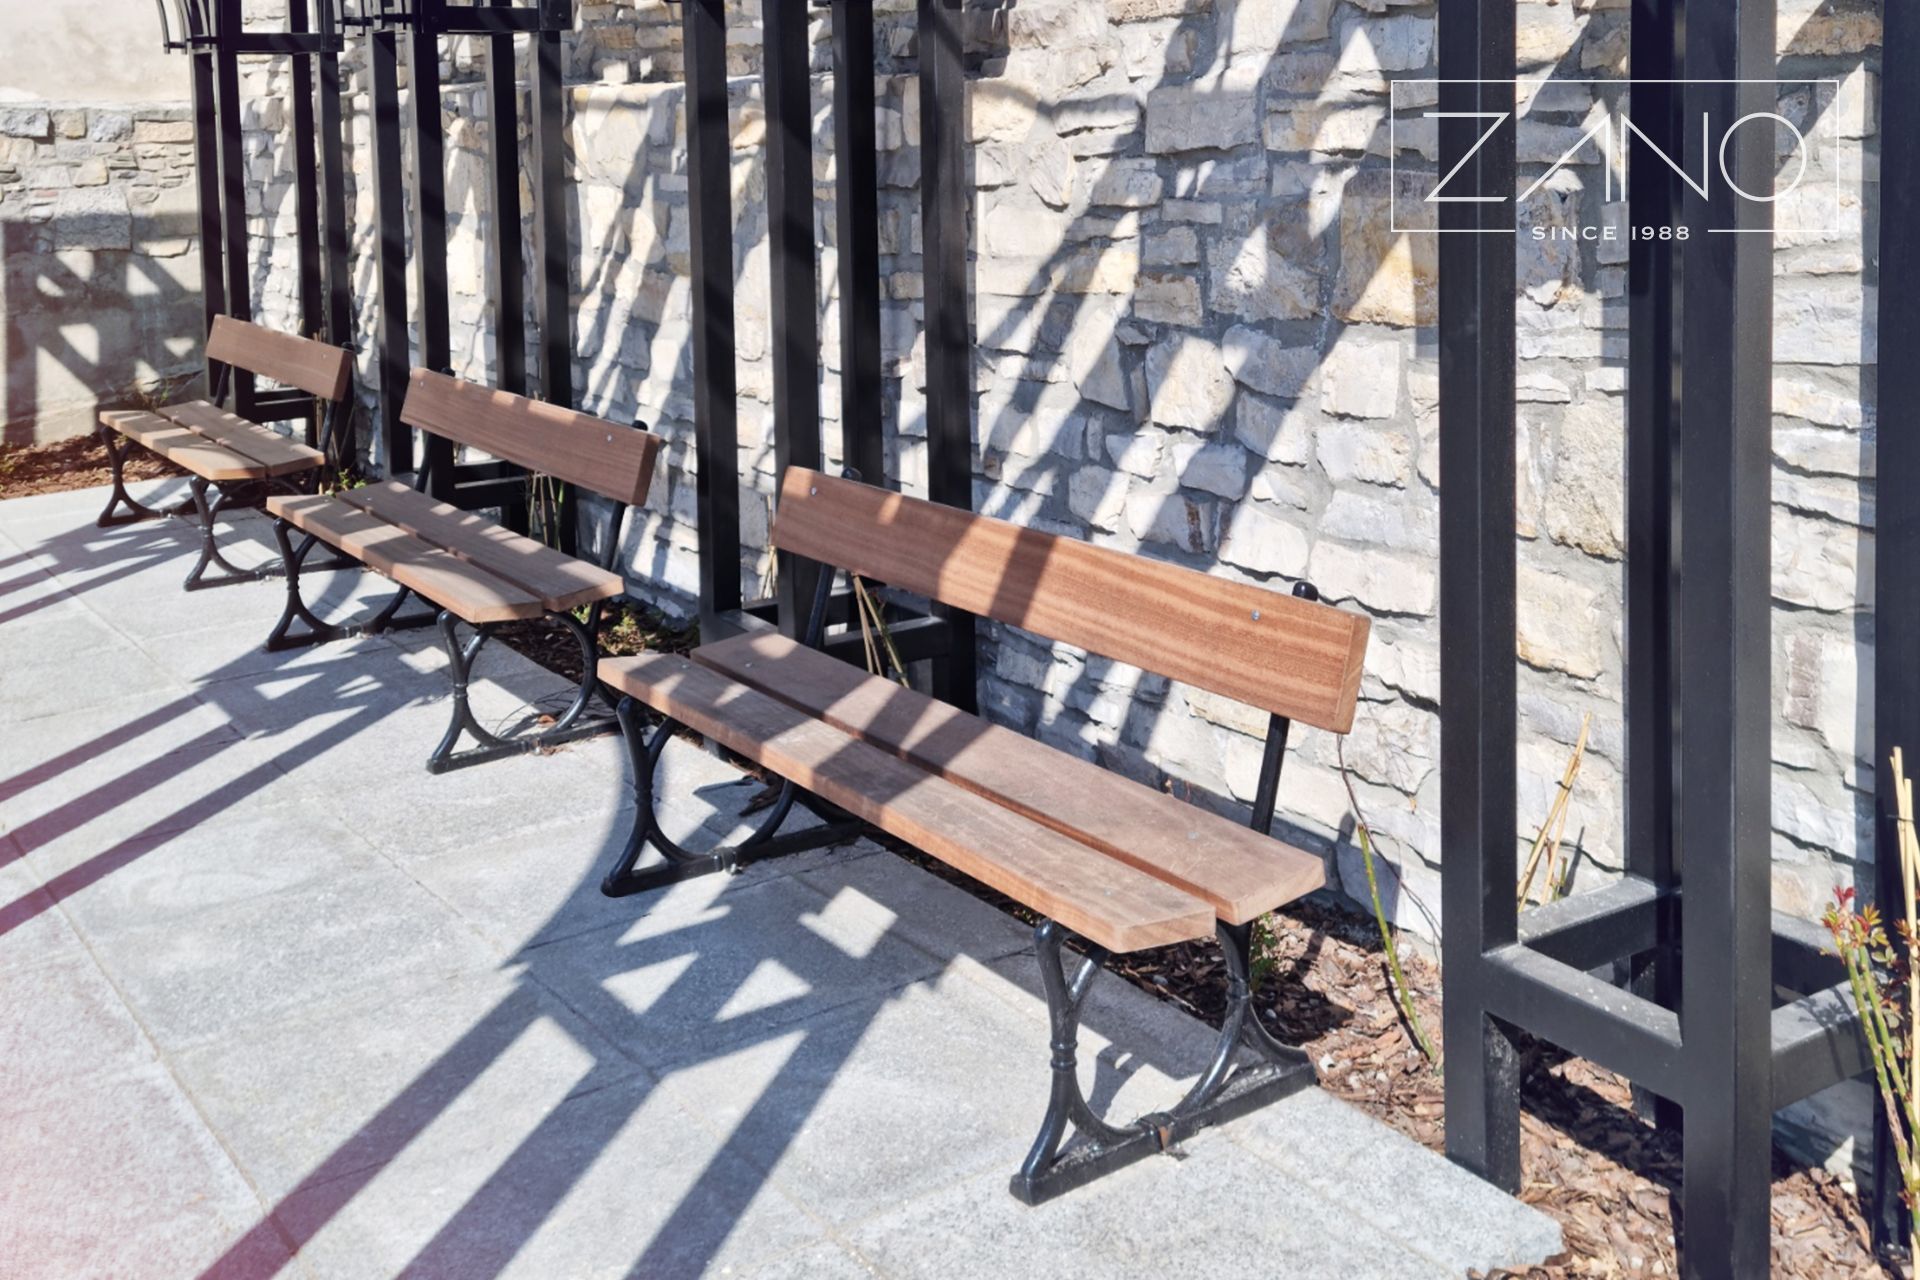 Retro-style cast iron benches with backrests